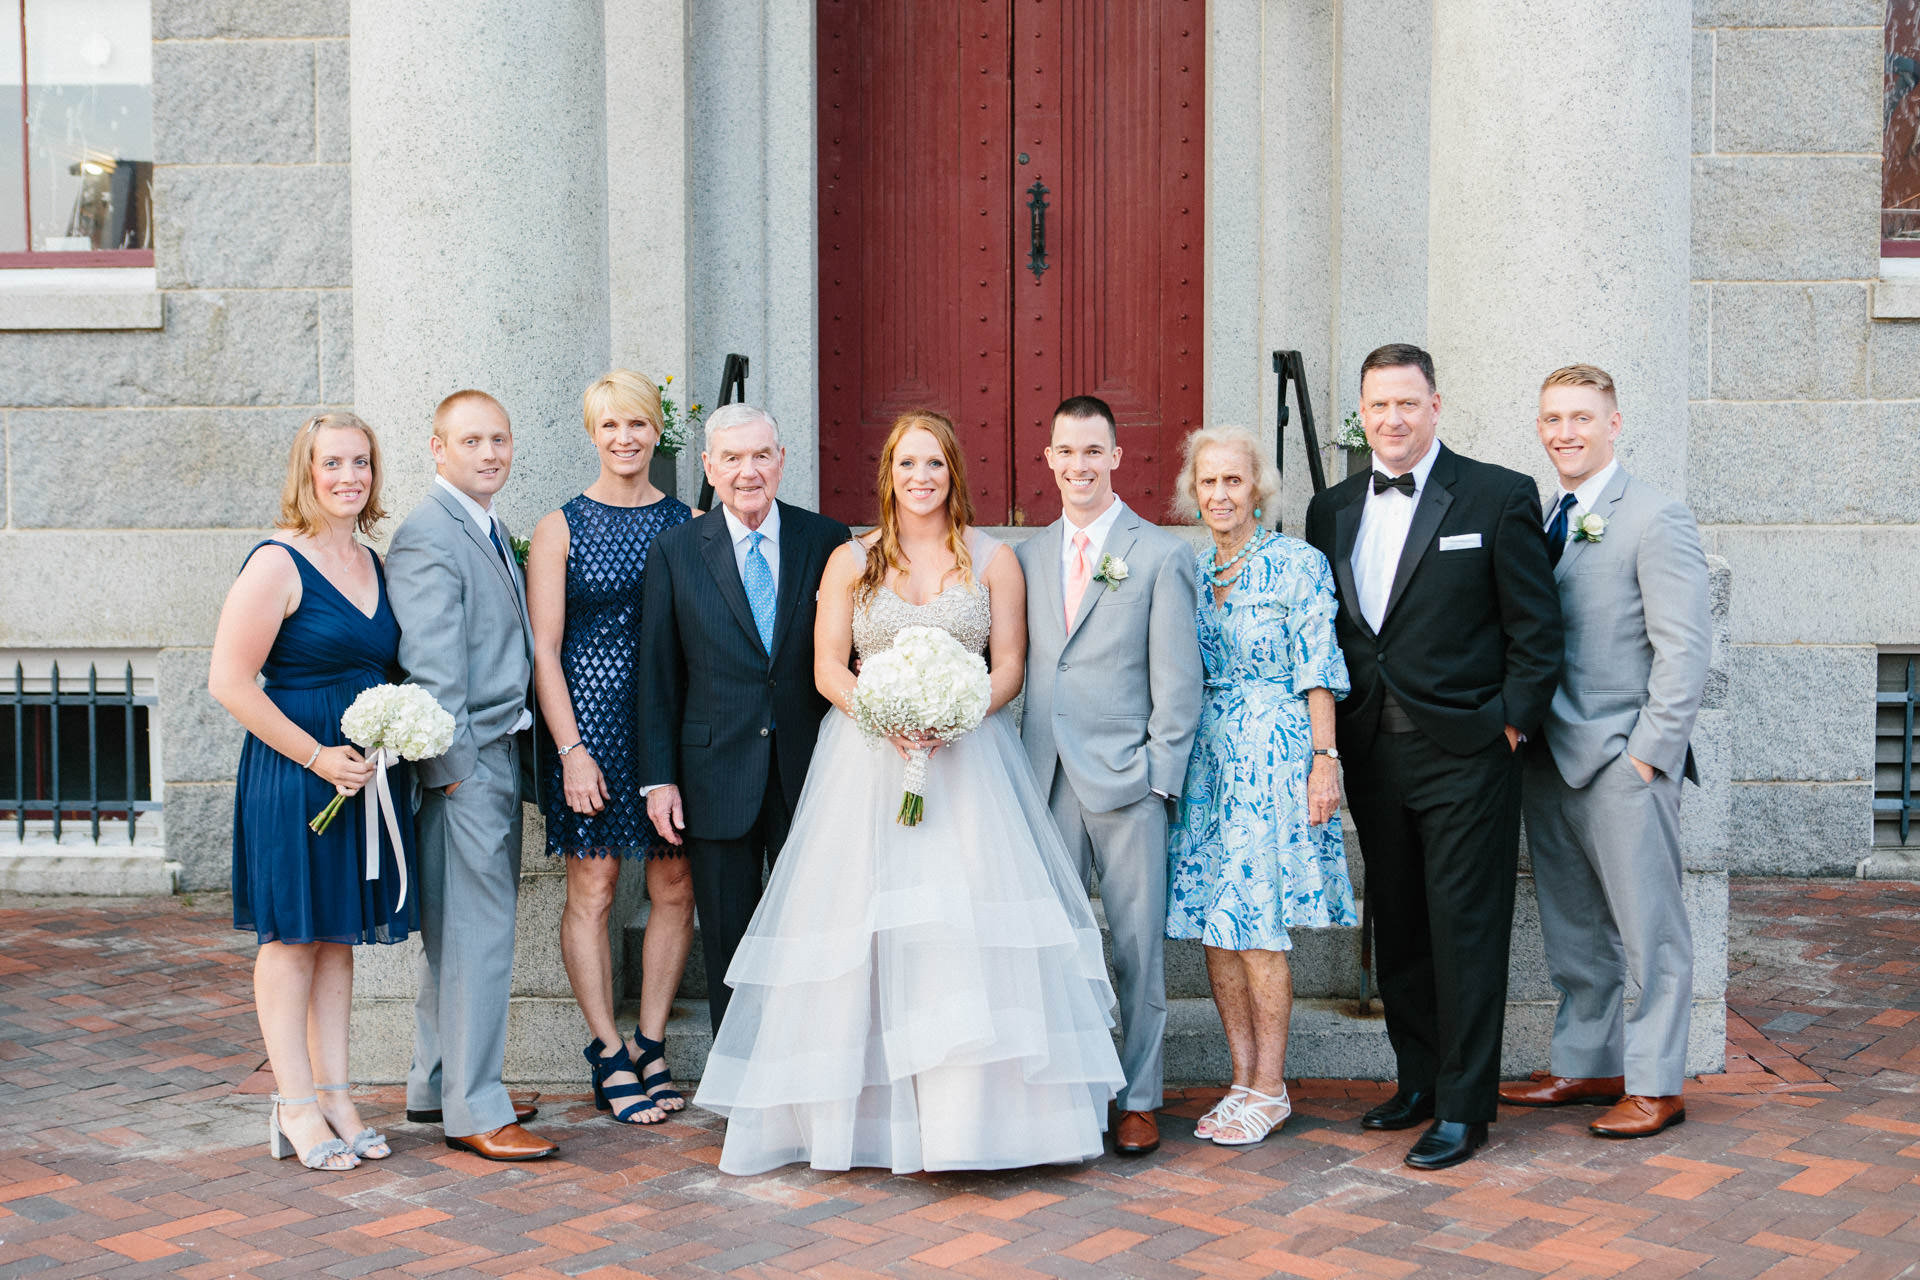 Bride and Groom posing with their immediate family